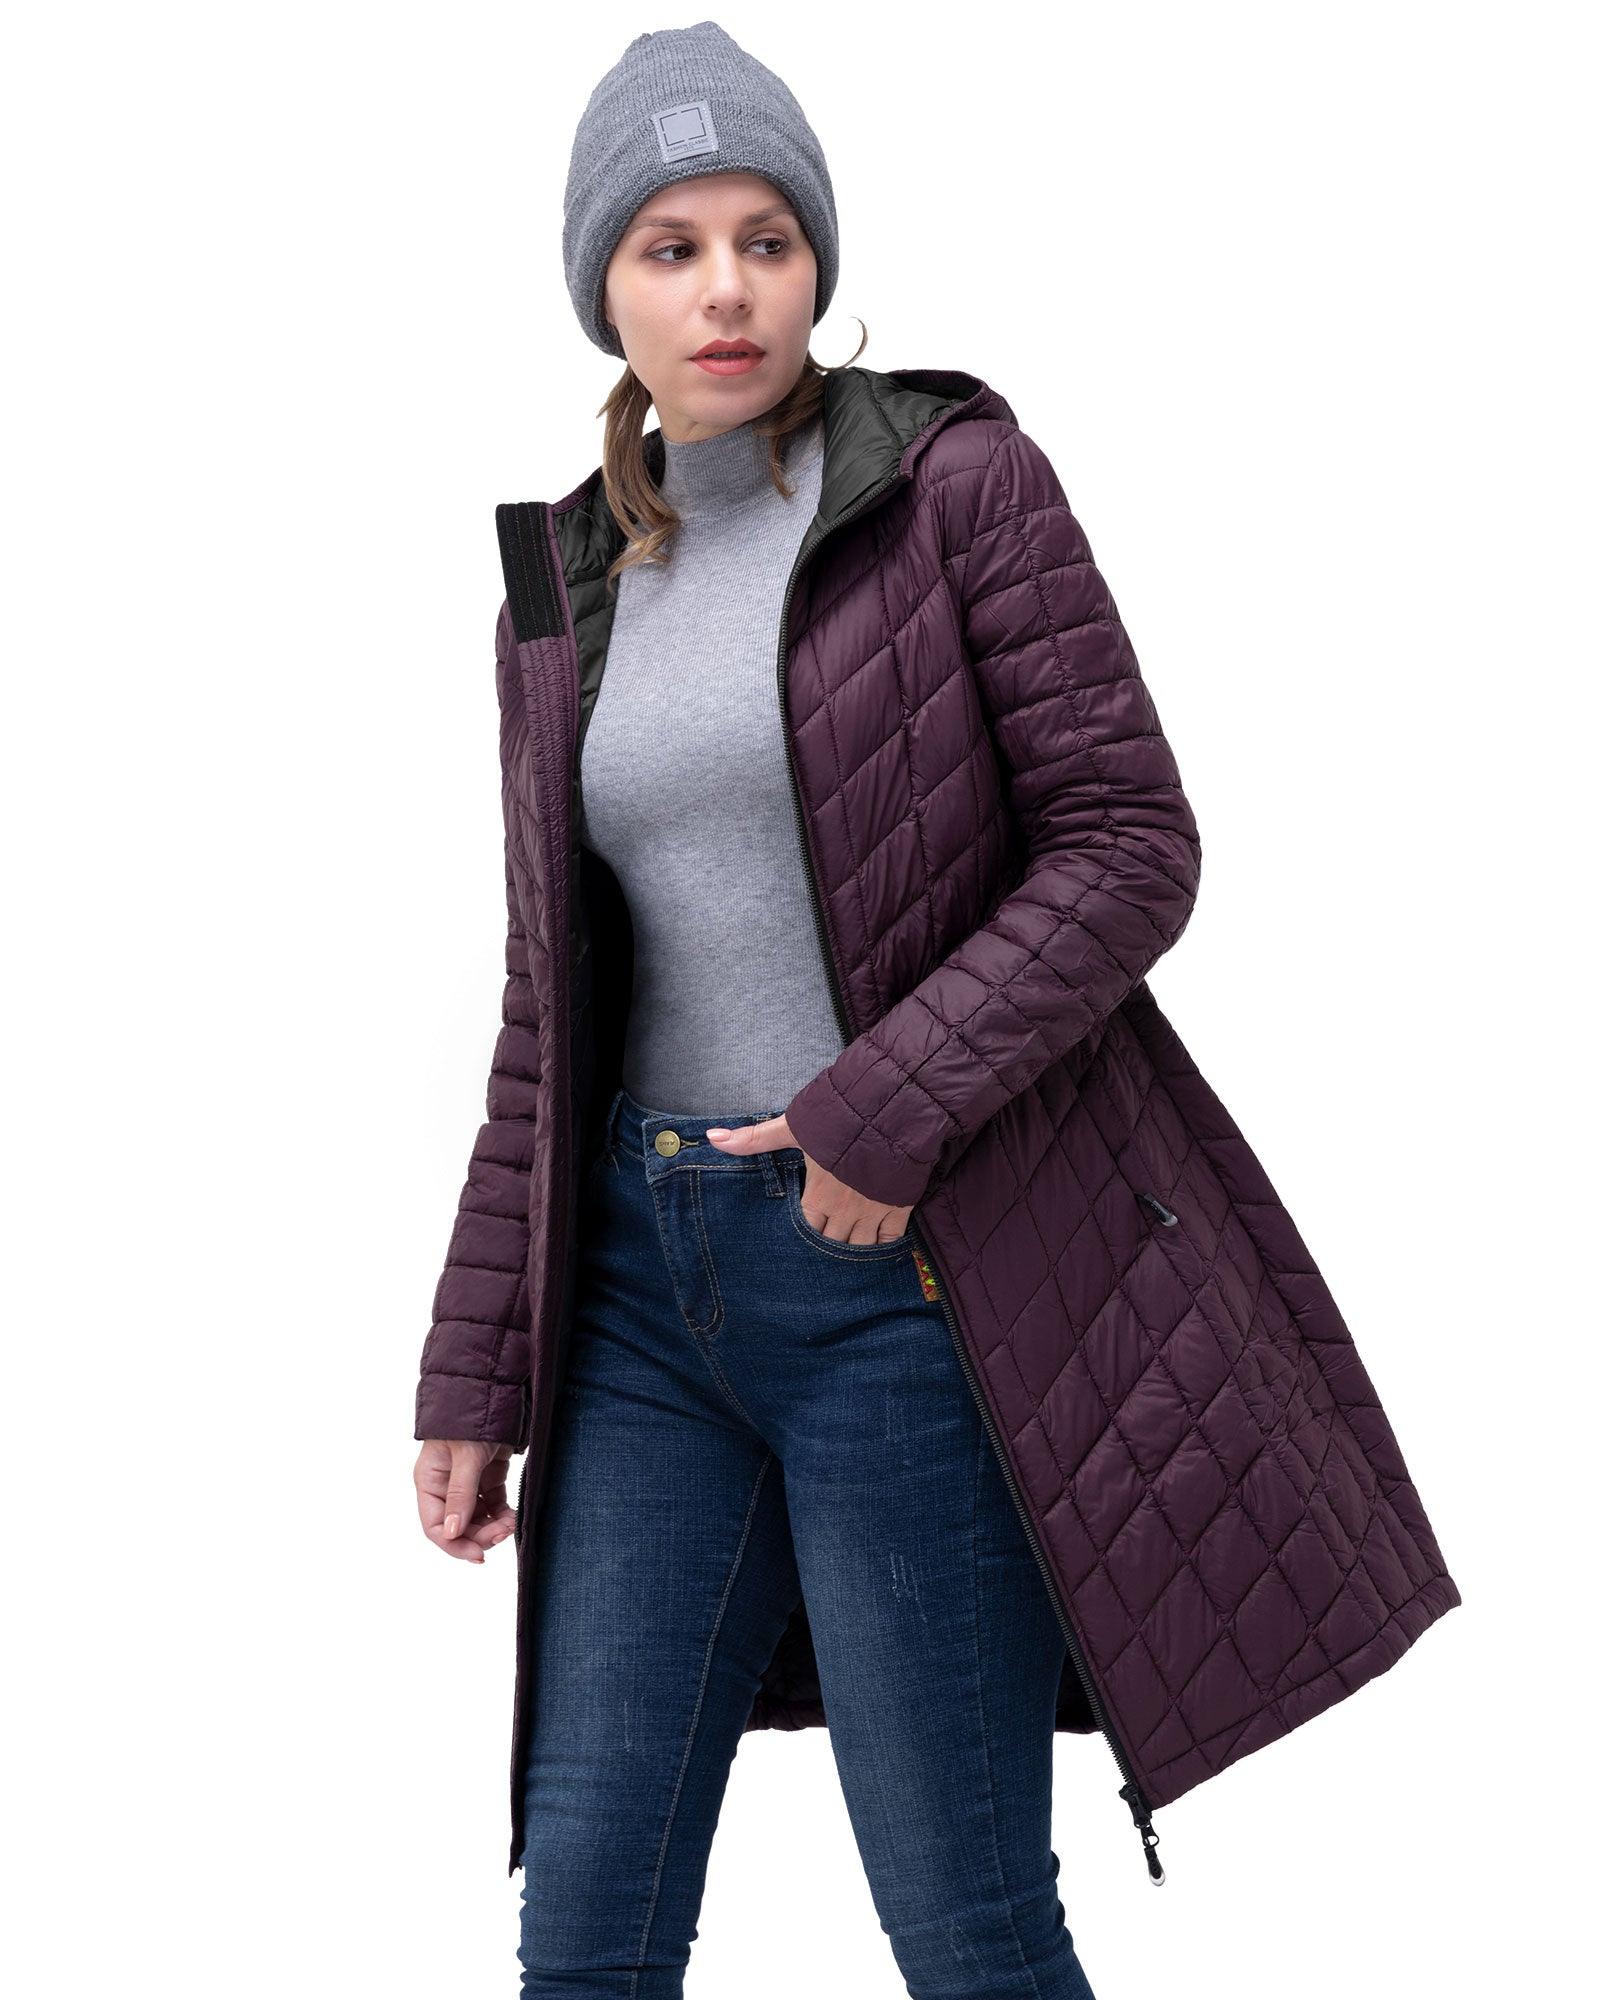 Women's Thermolite Long Hooded Puffer Jacket with 3 Pockets: 2.09 lbs –  33,000ft